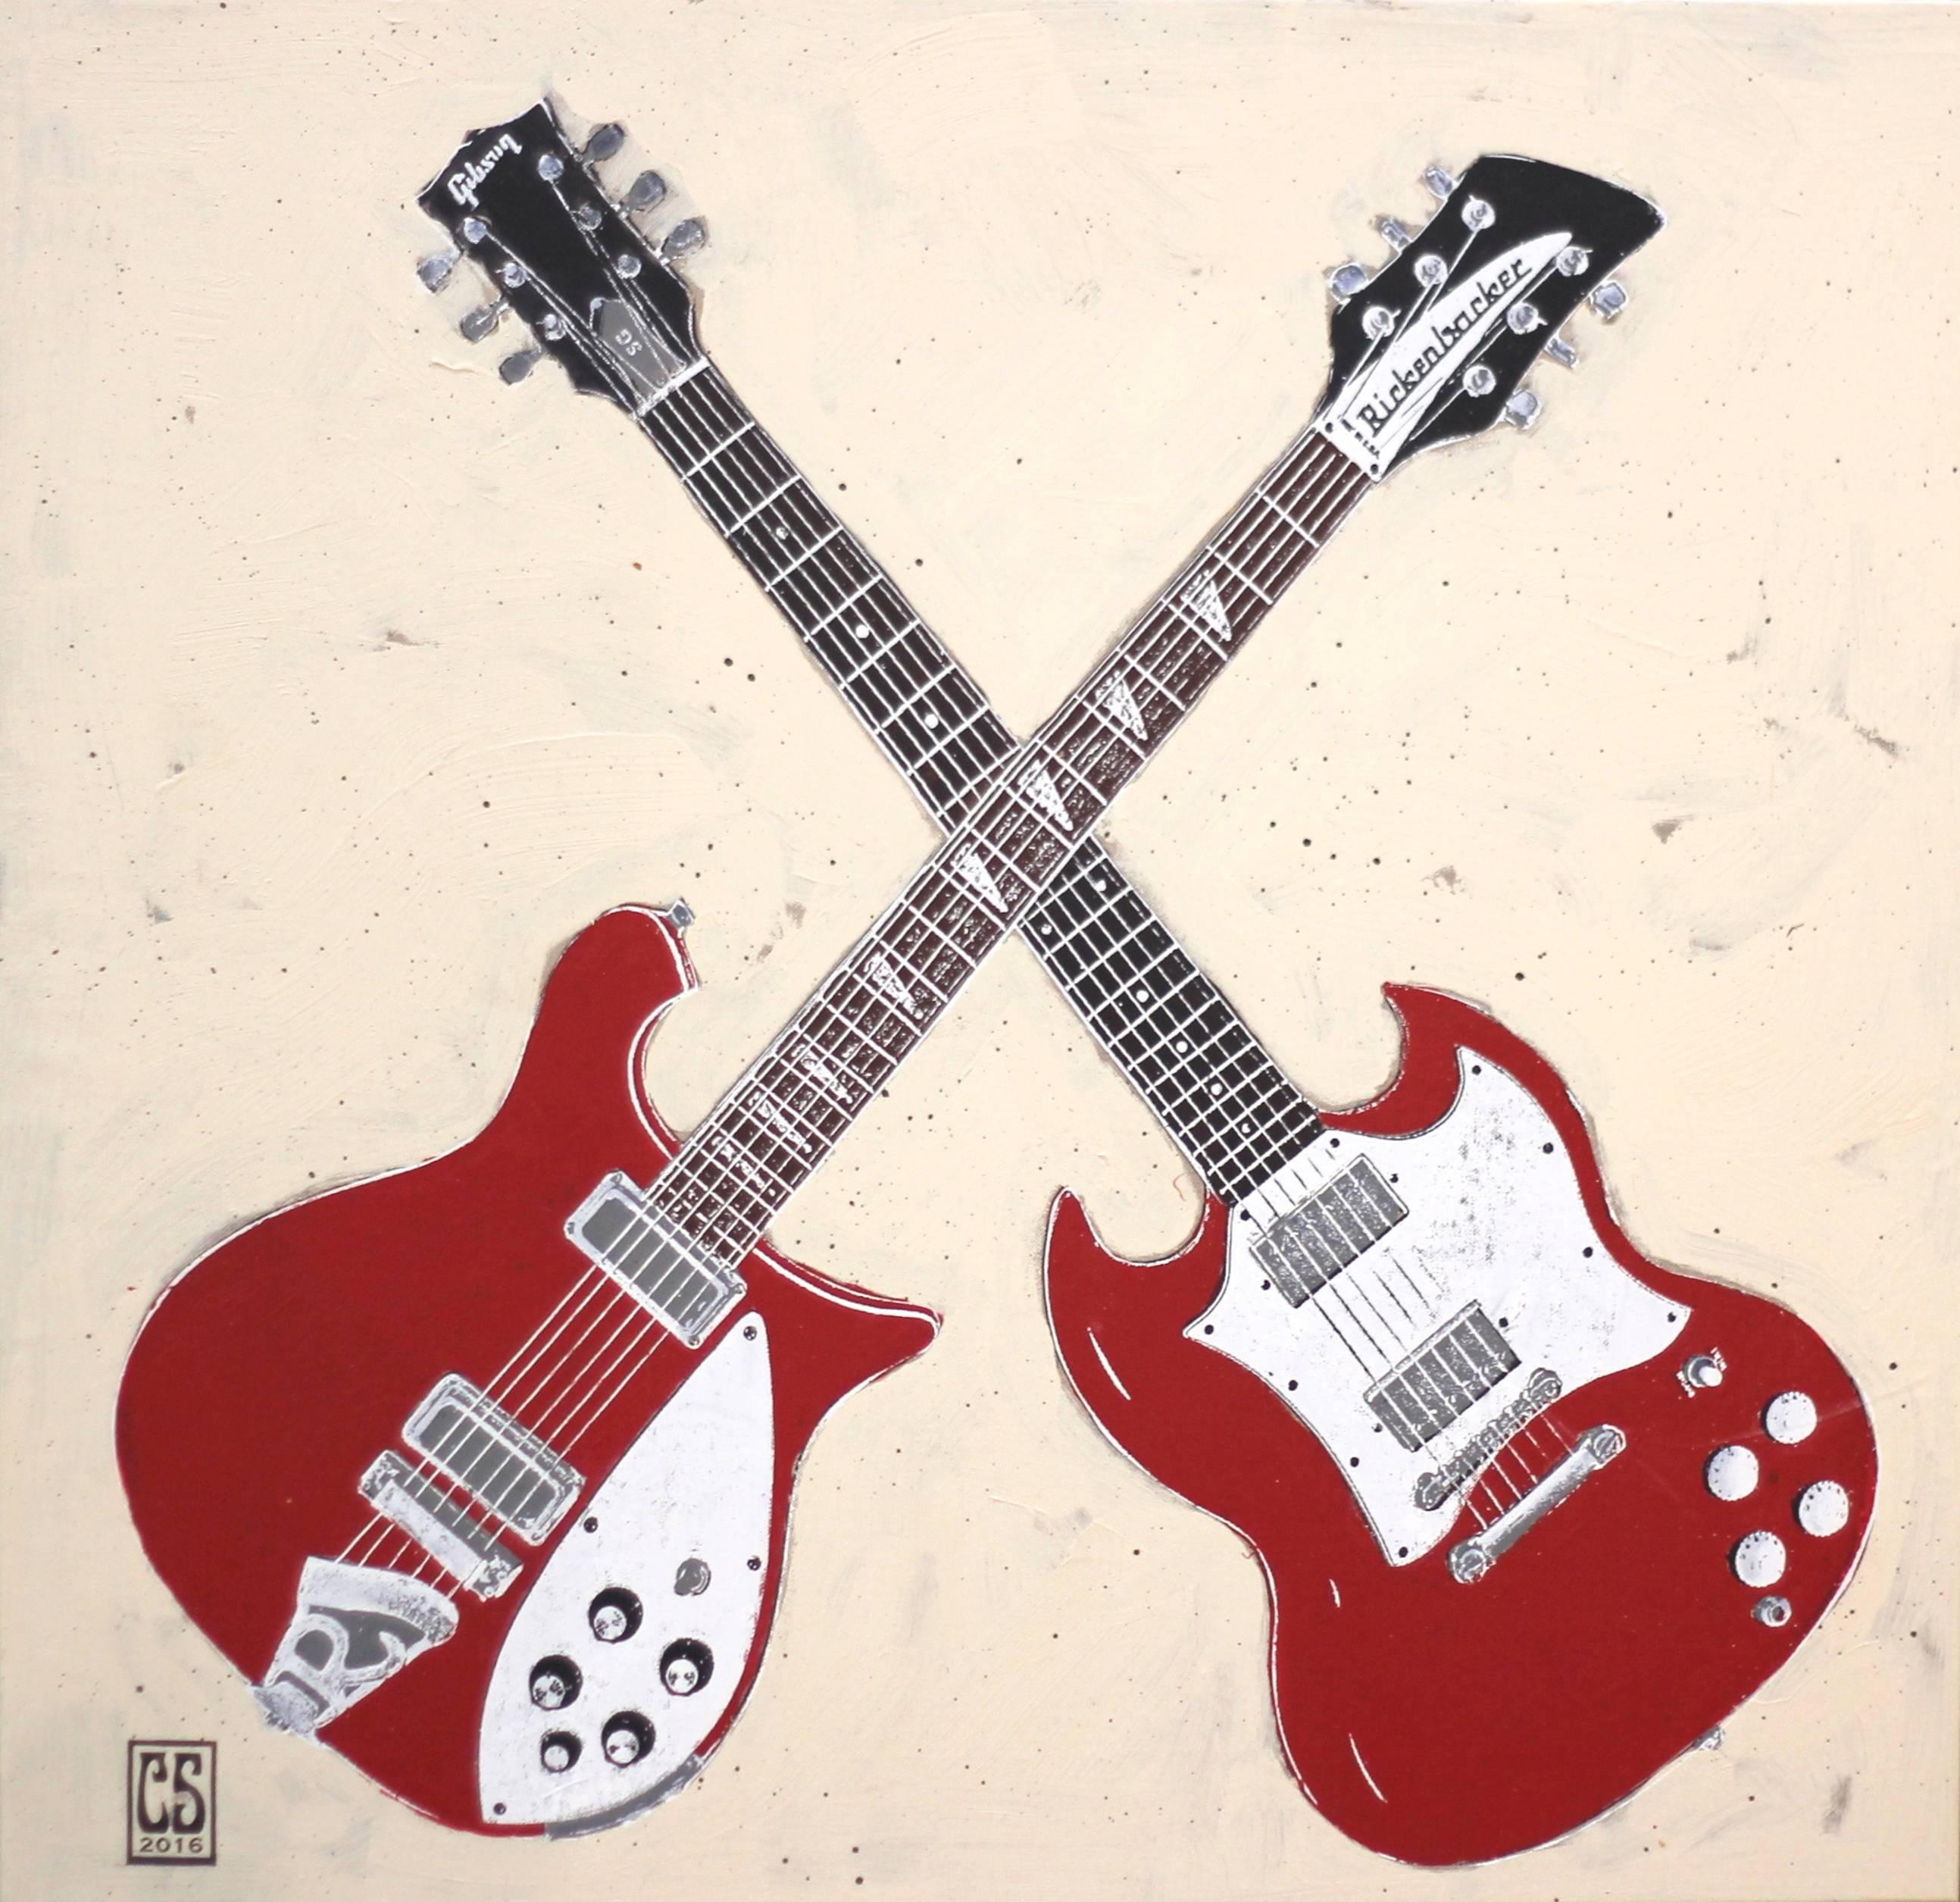 Carl Smith Still-Life Painting - Double Trouble - Two Red Guitars Original Music Instrument Painting on Canvas